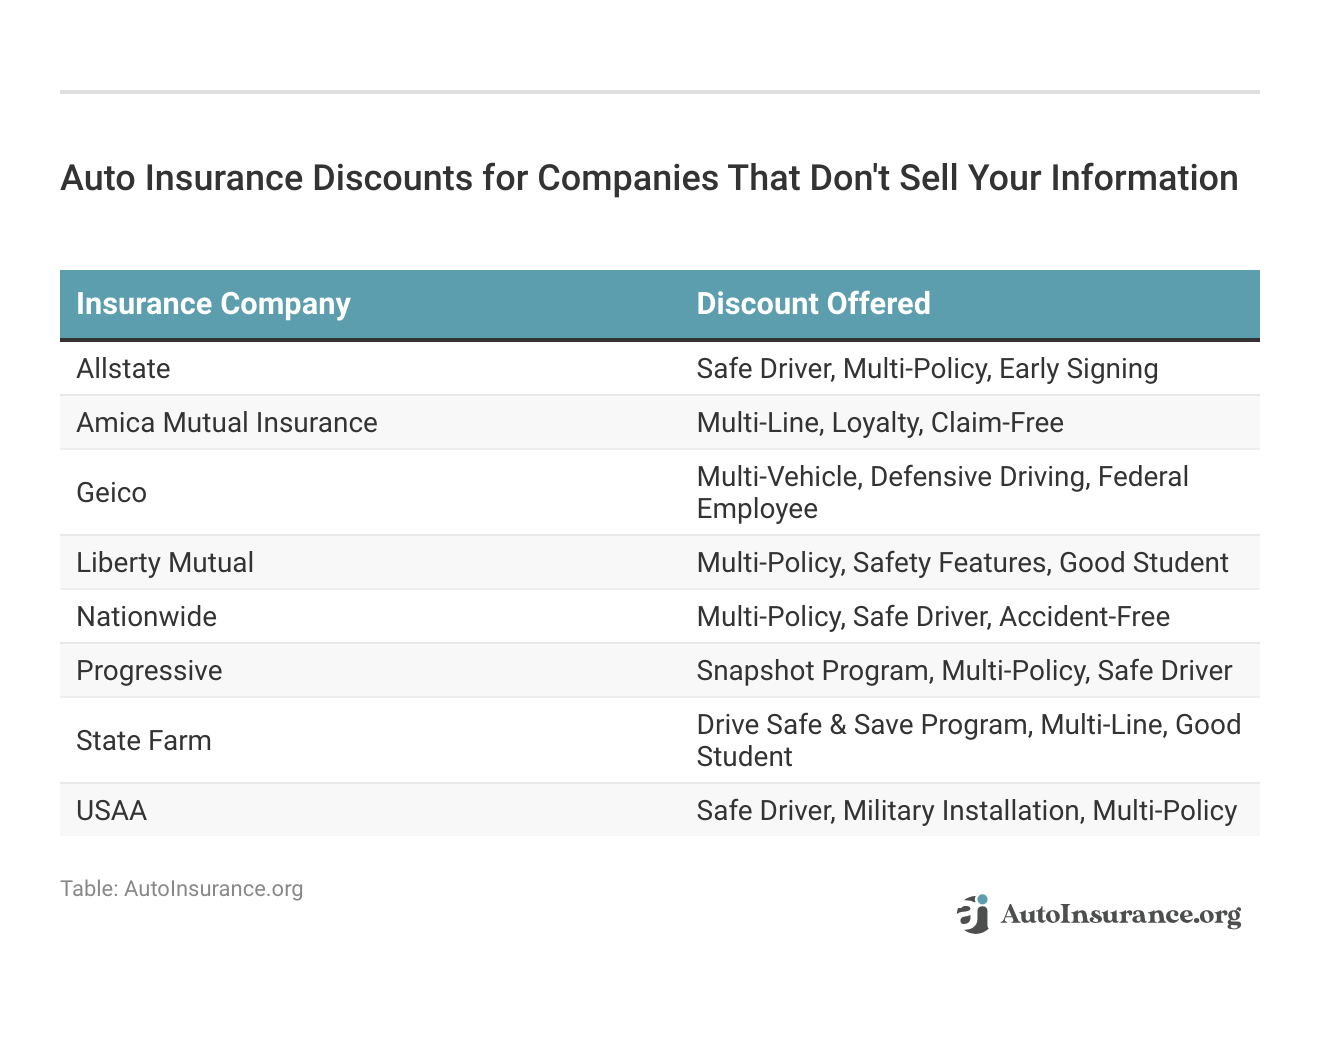 <h3>Auto Insurance Discounts for Companies That Don't Sell Your Information</h3>